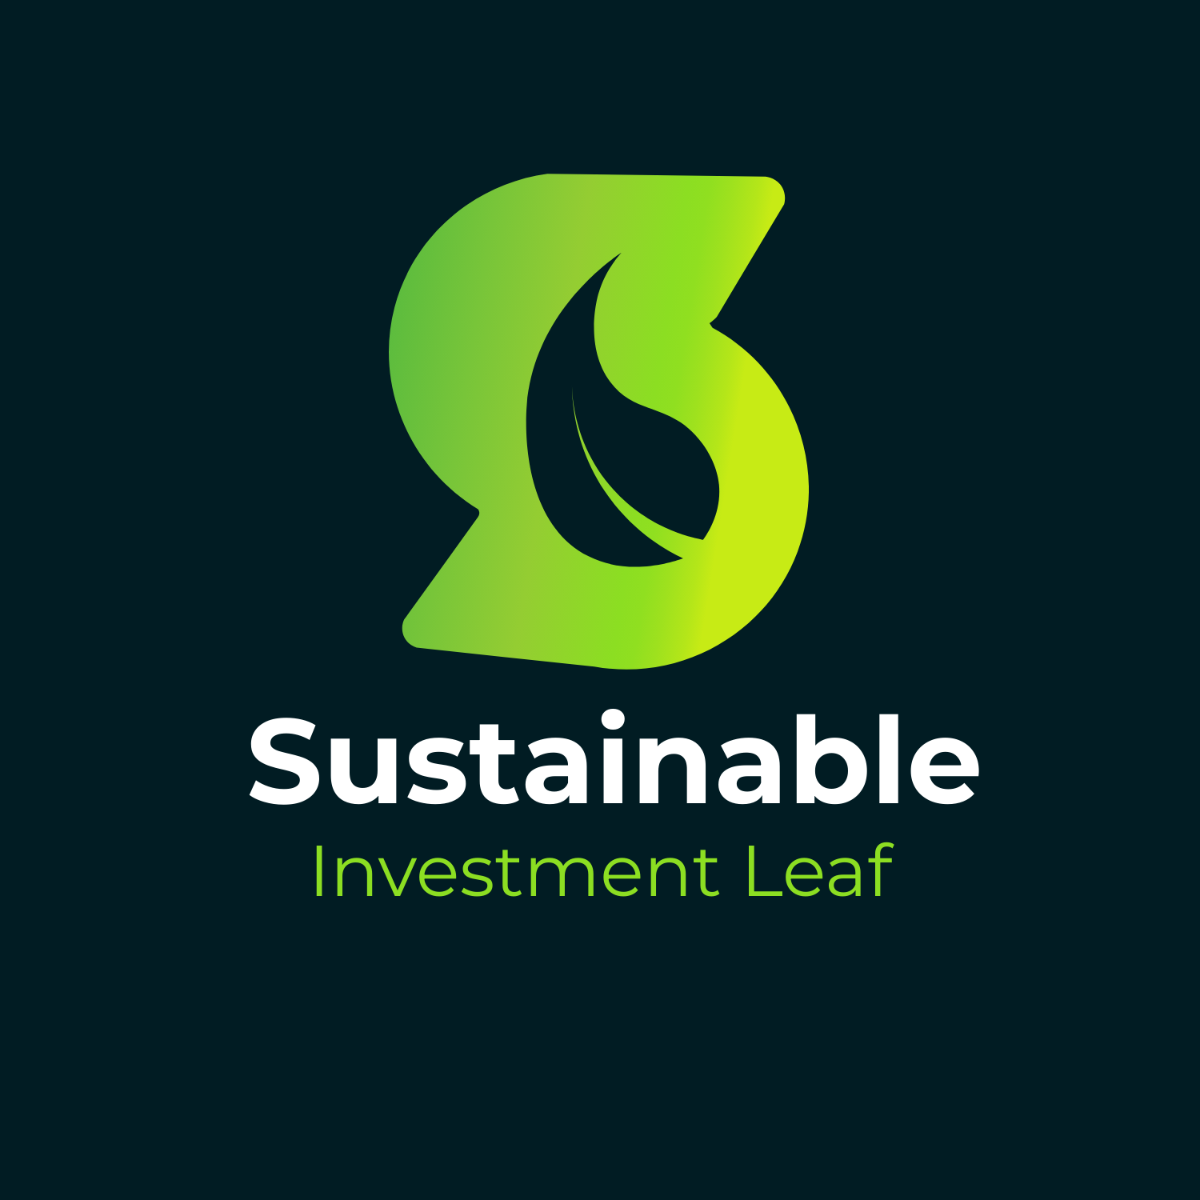 Sustainable Investment Leaf Logo Template